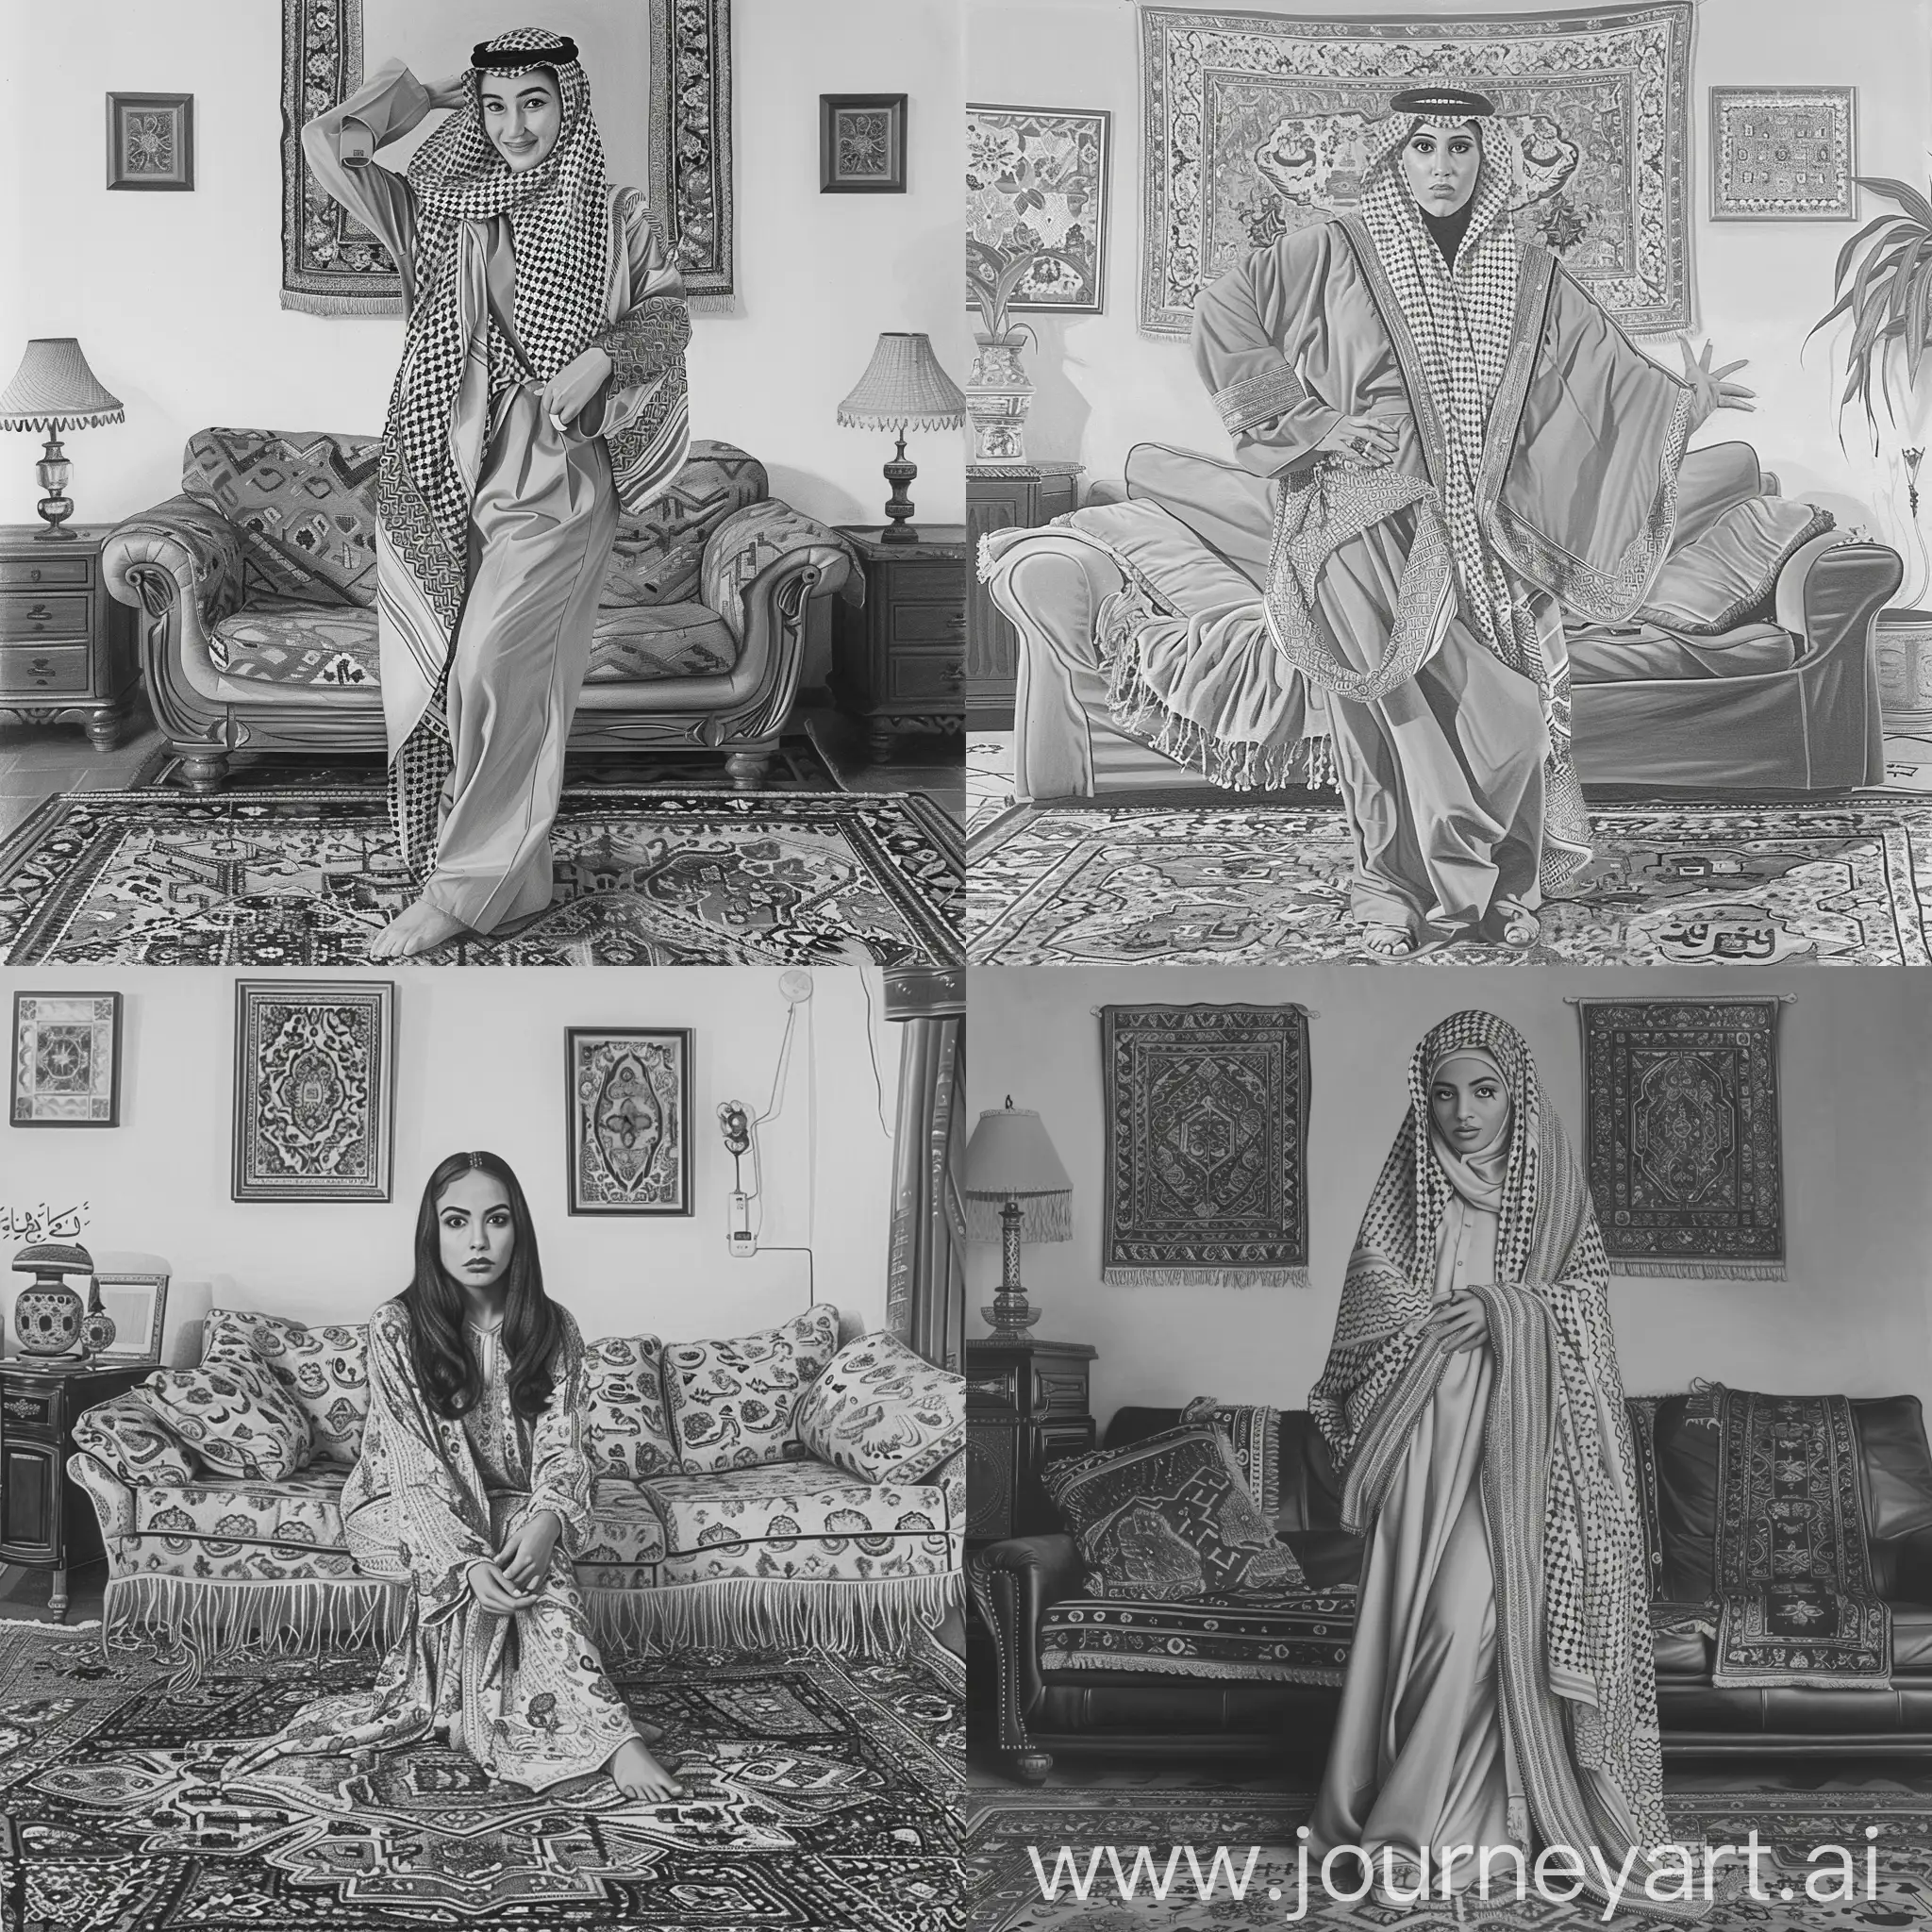 apollonia saintclair full body black and white drawing portrait catalogue of posing hilarious  saudi woman wearing saudi bsht, in 80s iranian living room